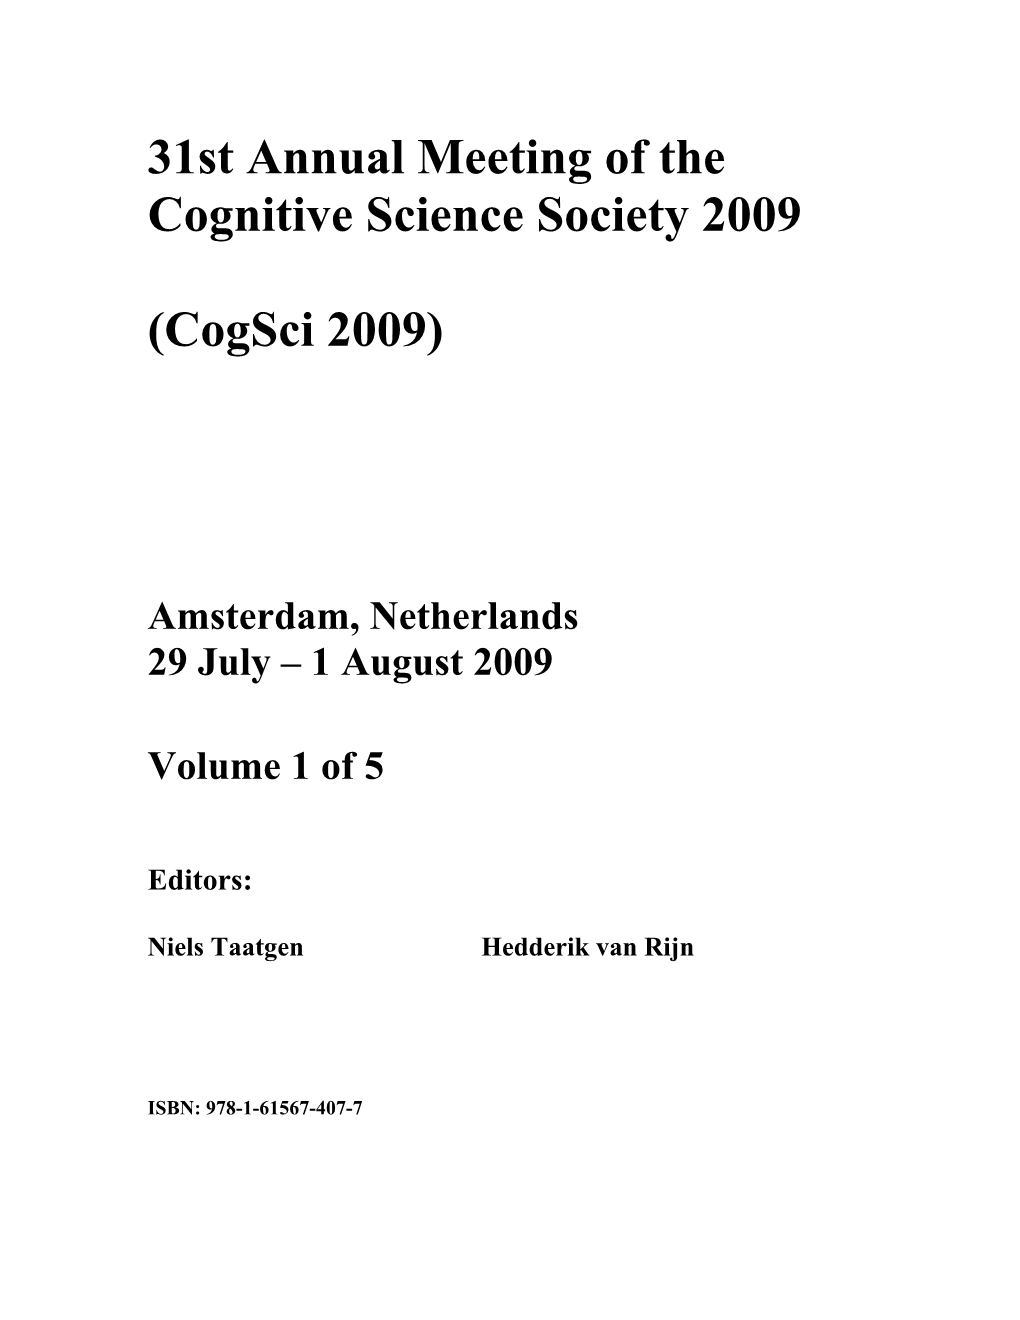 31St Annual Meeting of the Cognitive Science Society 2009